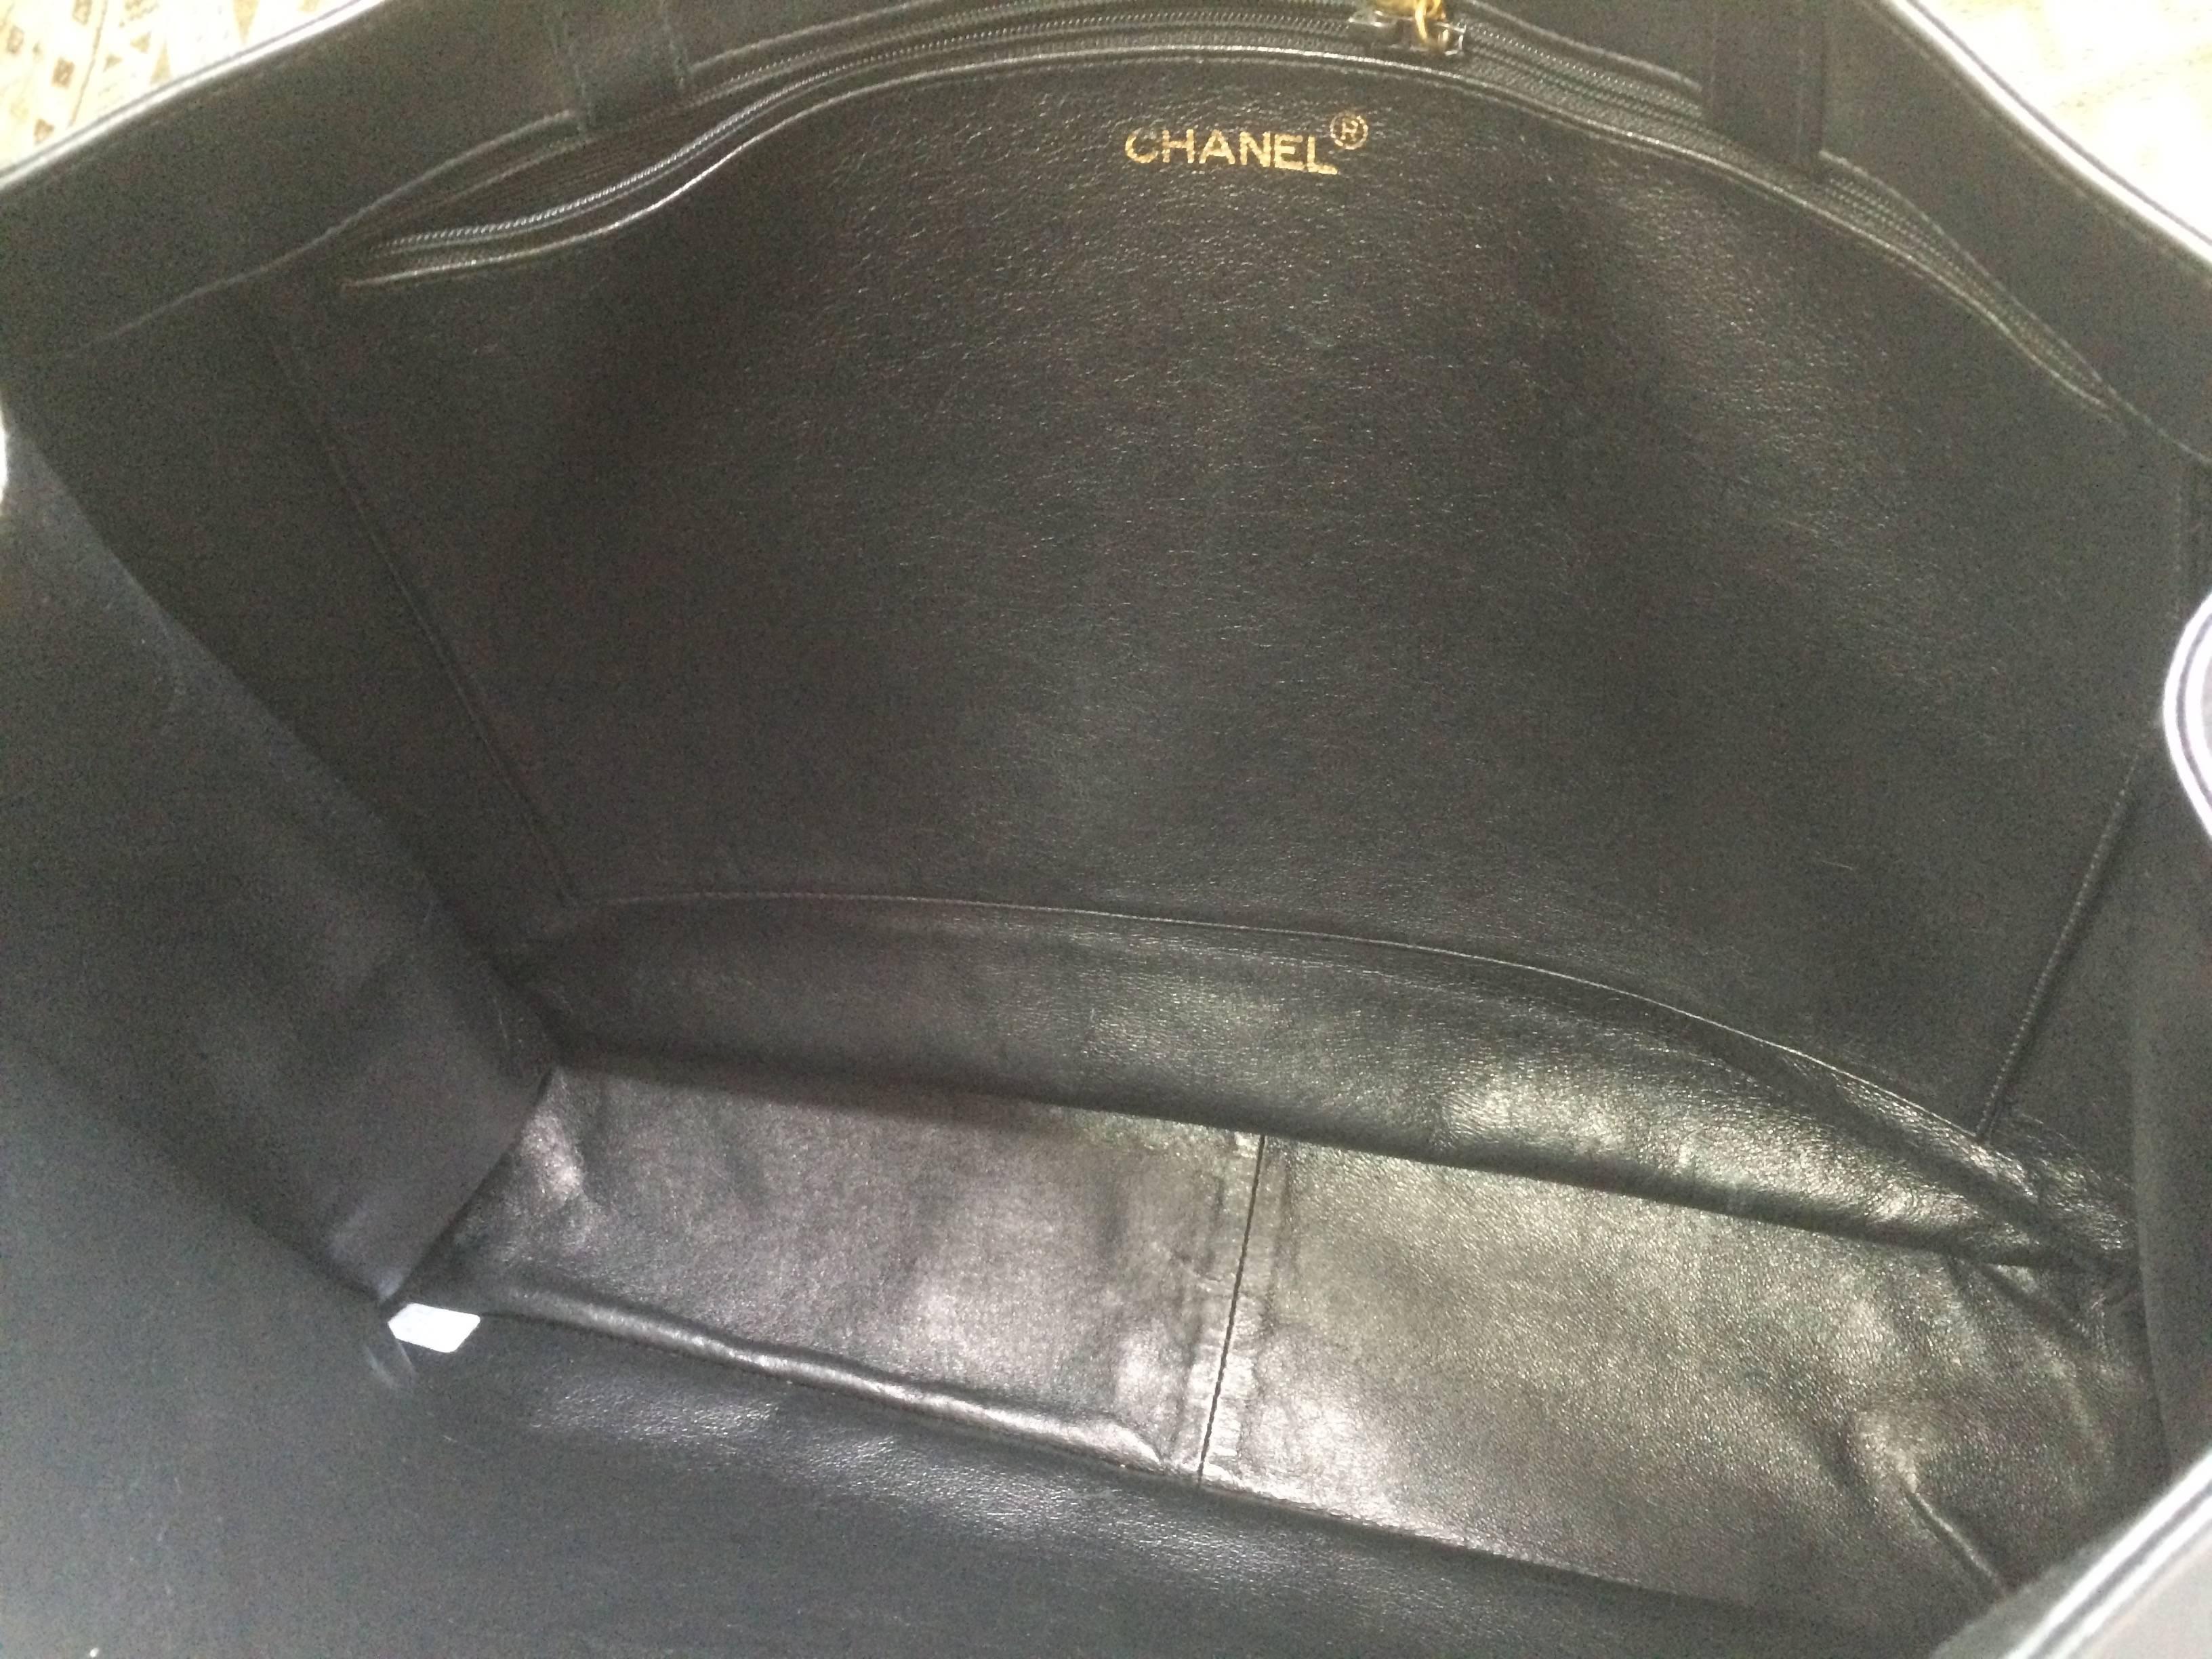 Vintage CHANEL black calfskin large tote bag with gold tone chain handles and CC 2